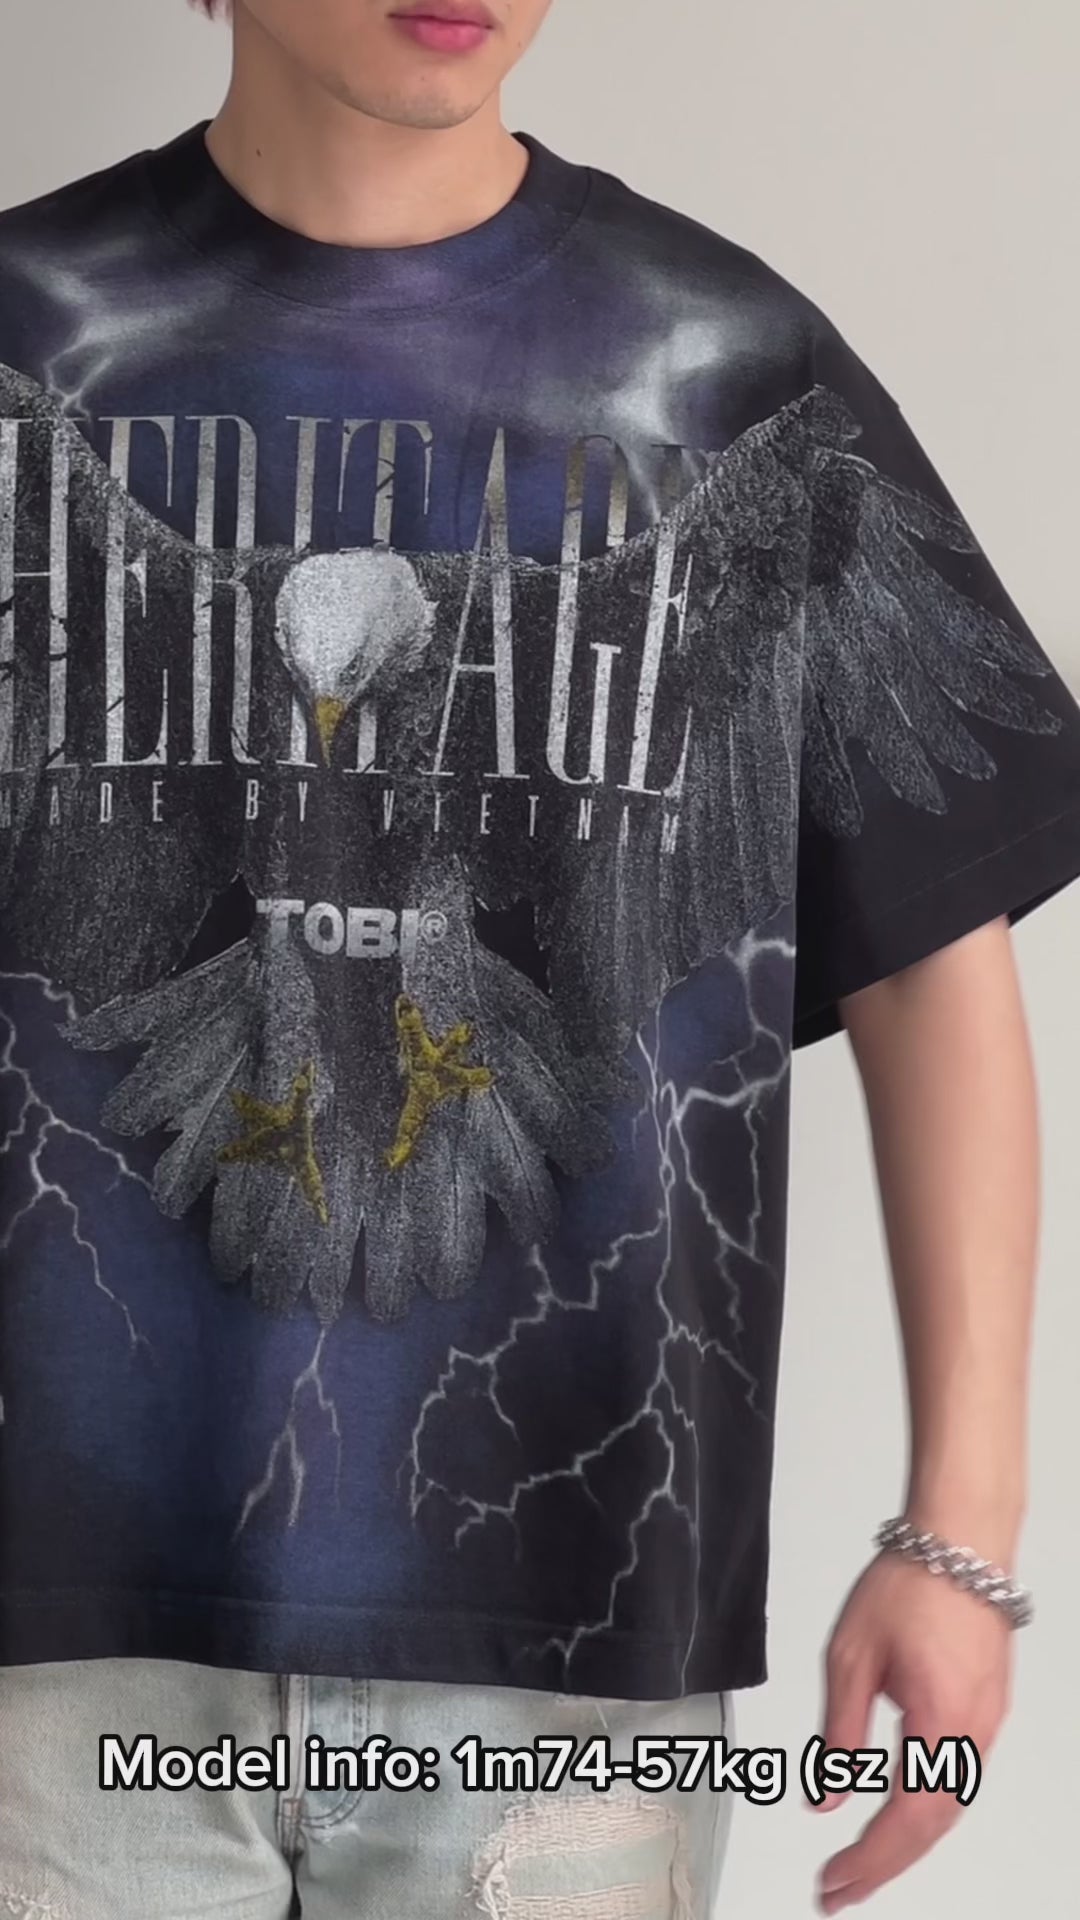 TOBI® Lord Of The Sky T-shirt